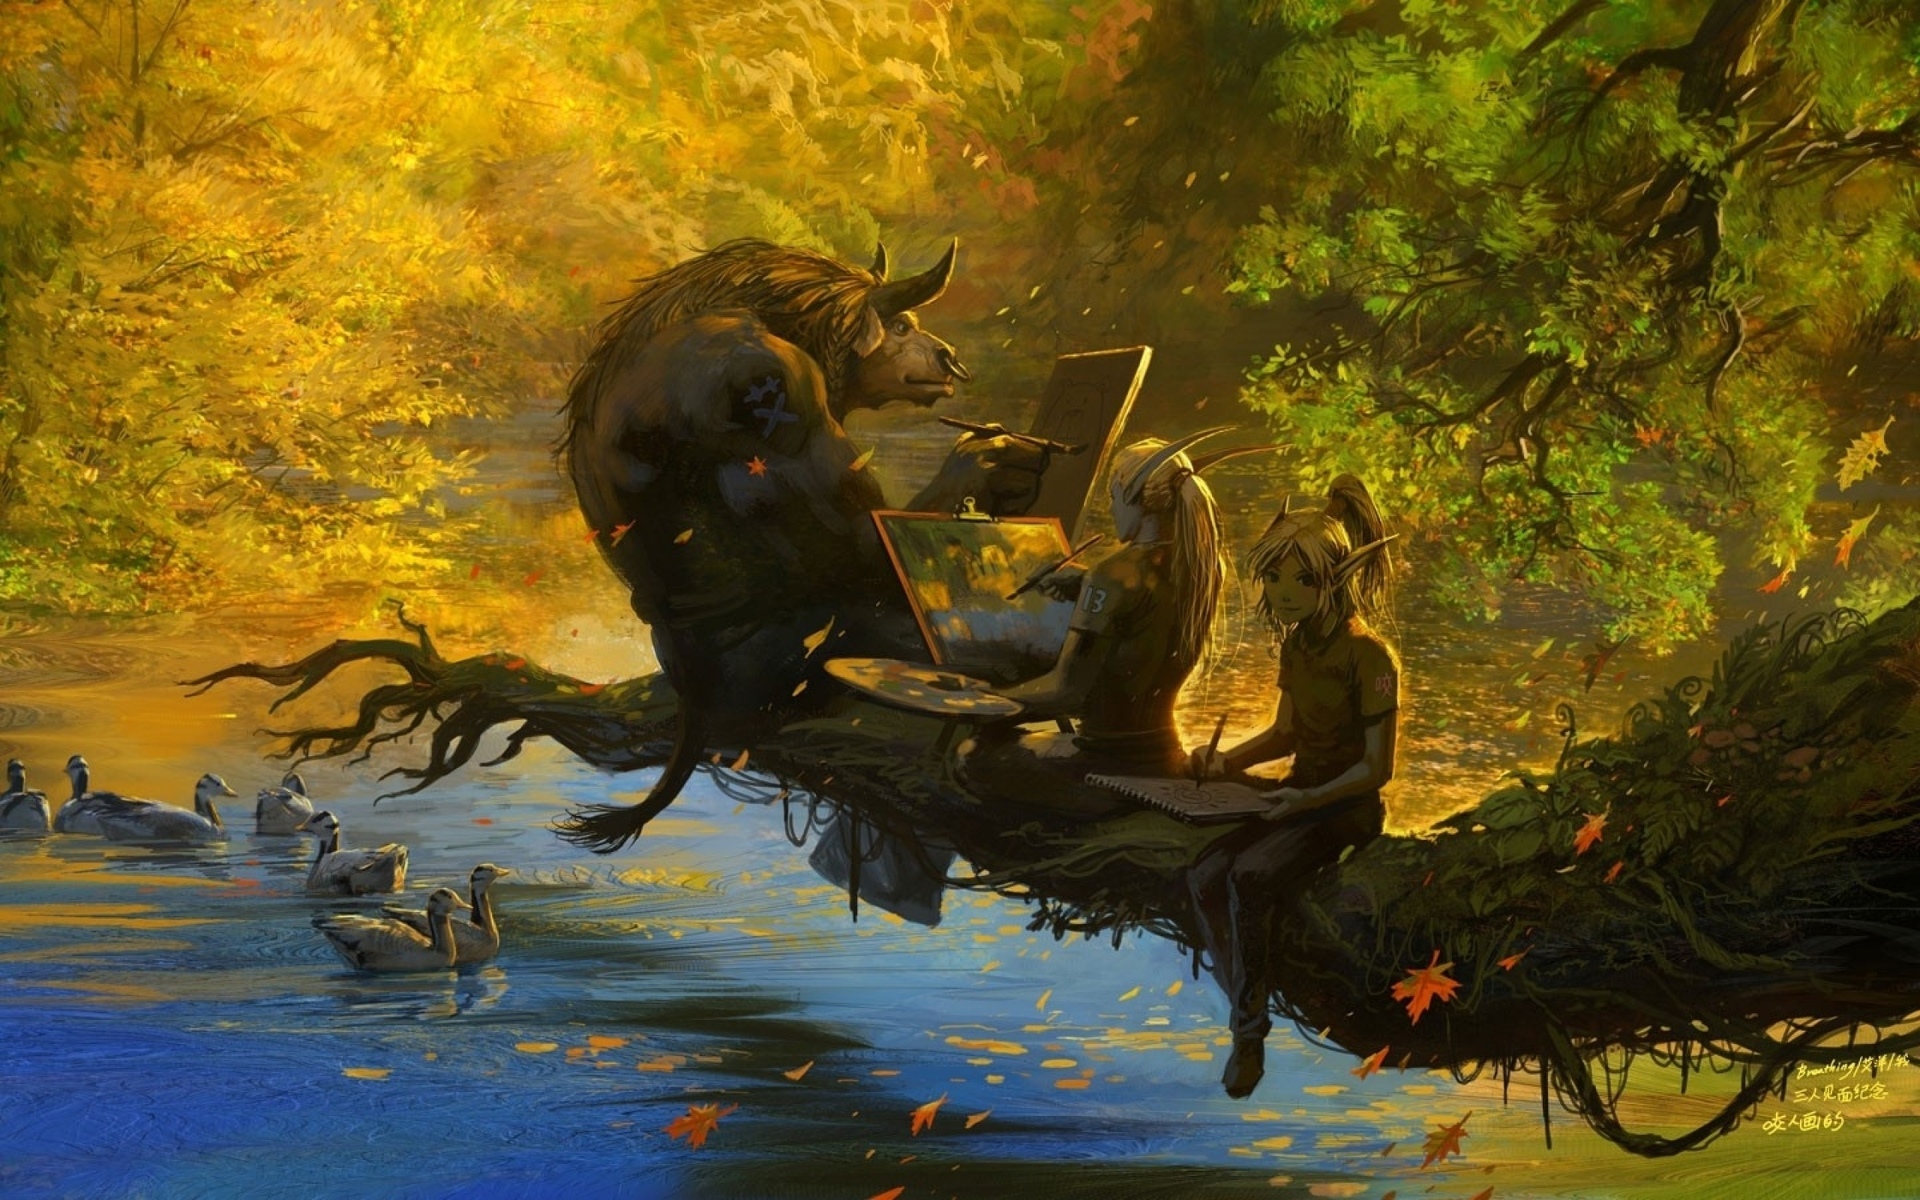 world of warcraft, Wow, Fantasy, Computer, Technology, Scifi, Artistic, Creatures, Animals, Rivers, Trees, Forest, Landscapes, Humor, Funny Wallpaper